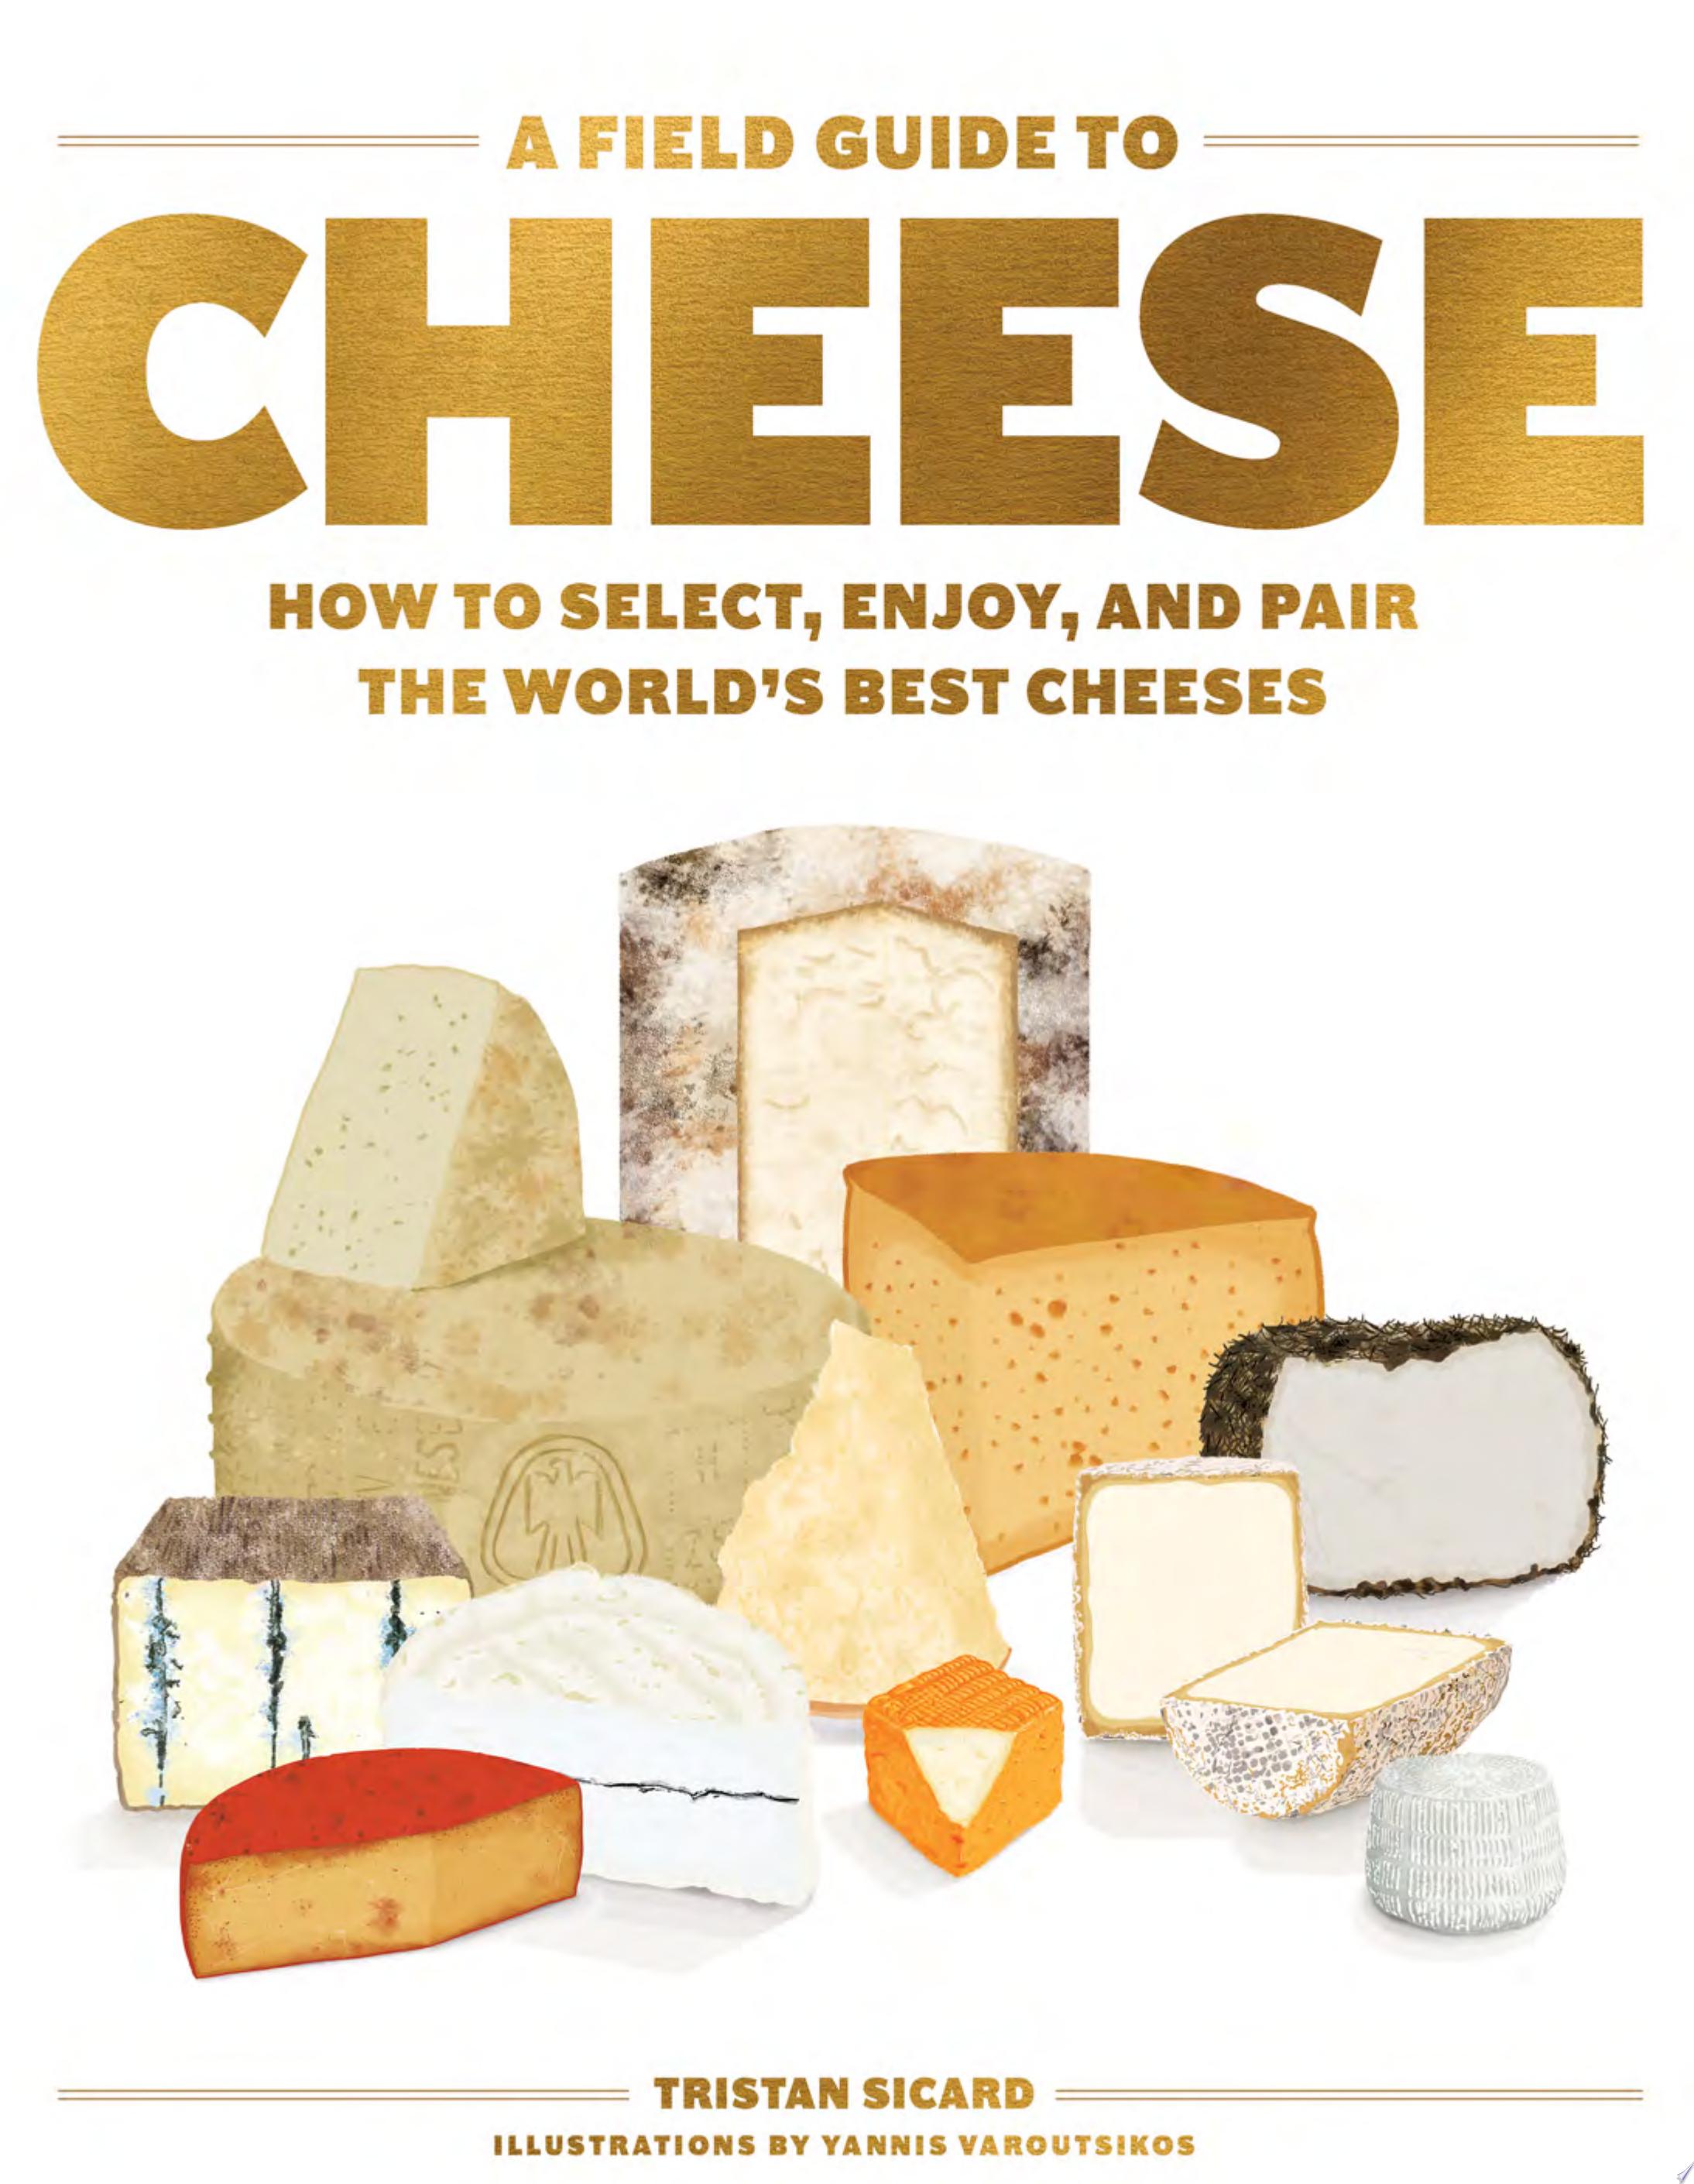 Image for "A Field Guide to Cheese"